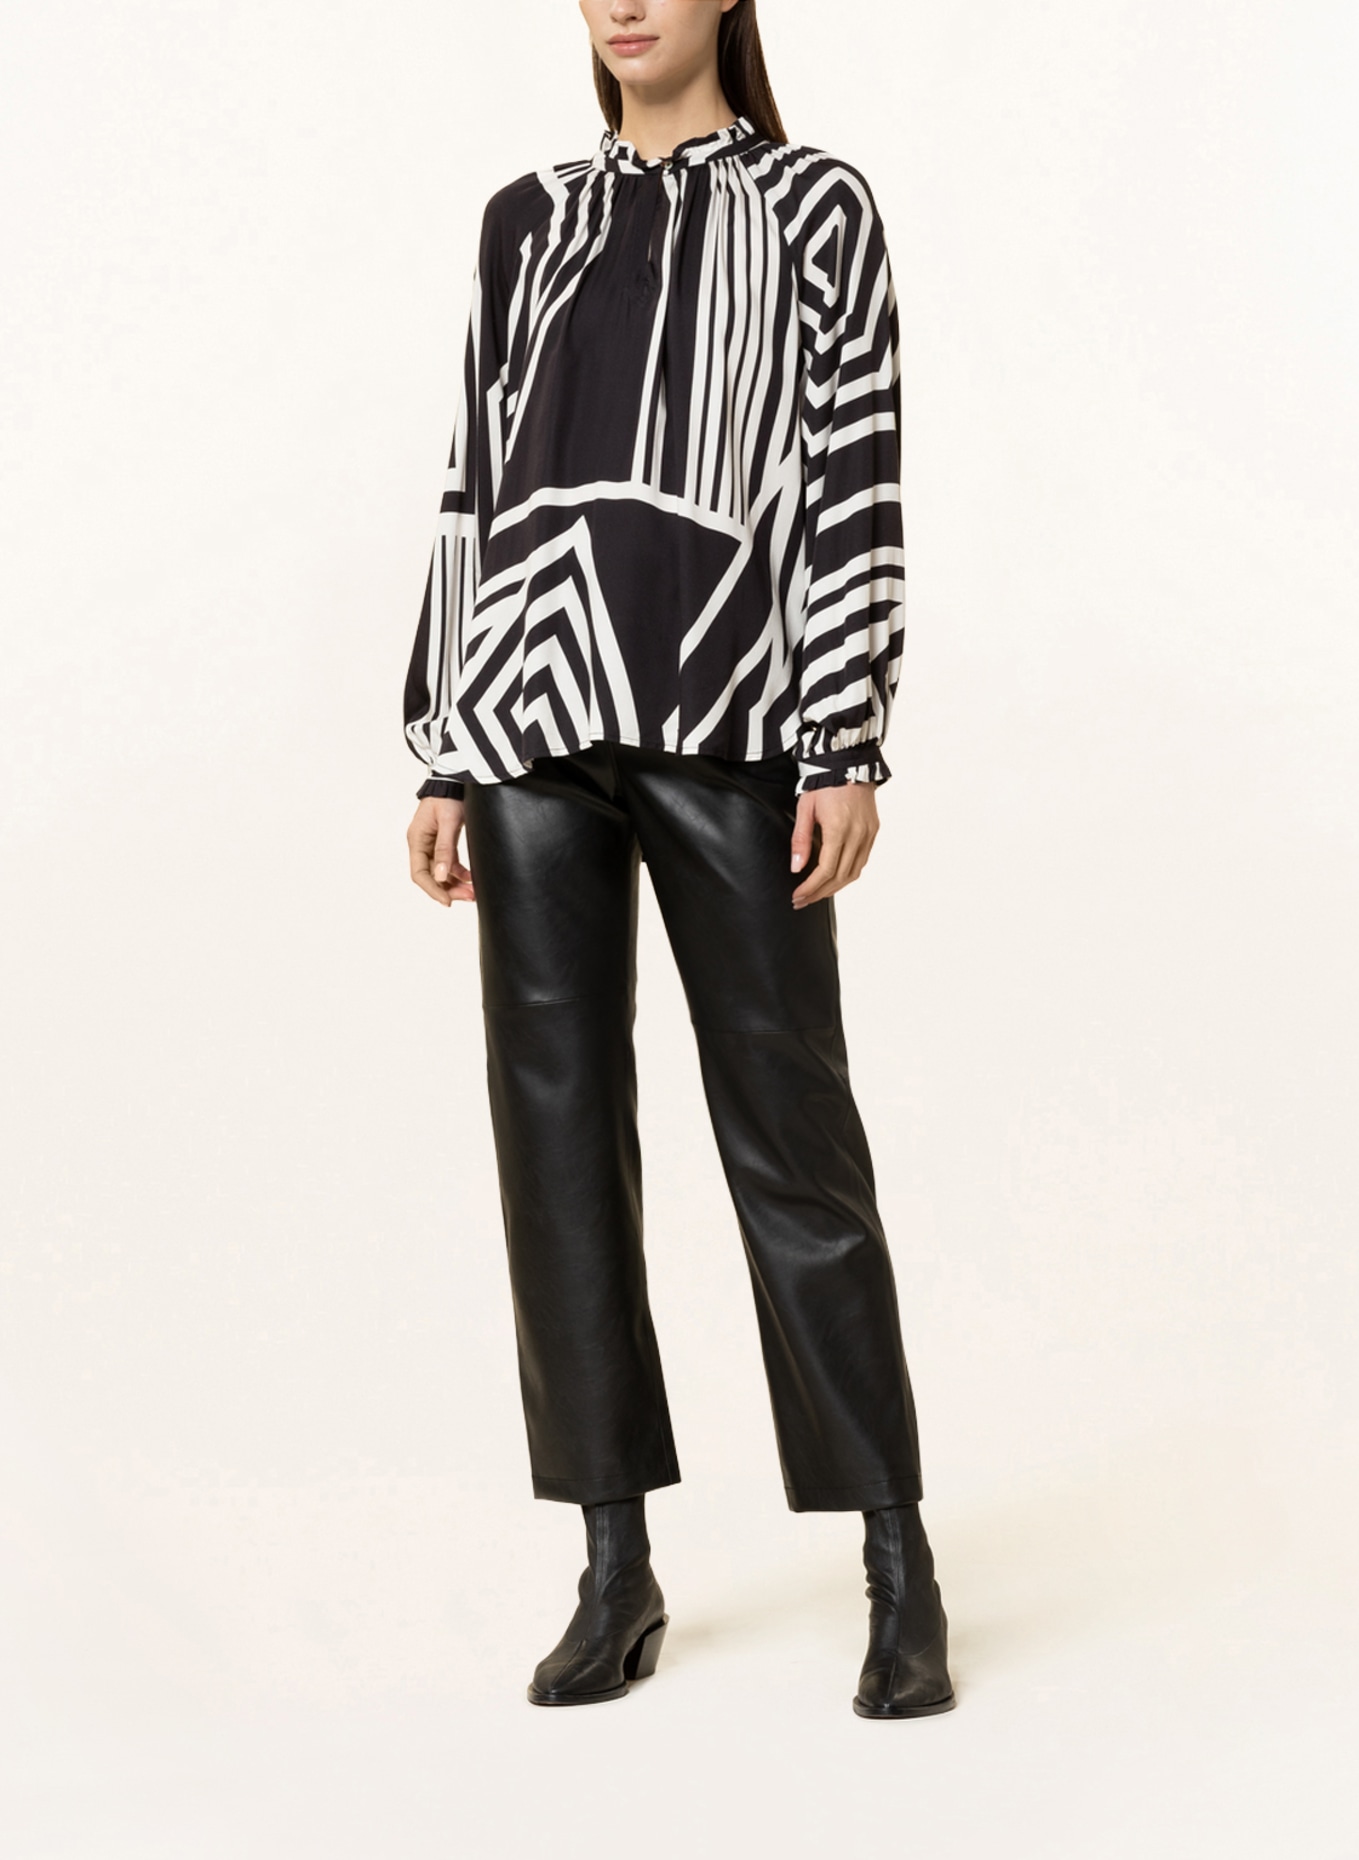 TONNO & PANNA Blouse-style shirt HERMINE with ruffles, Color: BLACK/ WHITE (Image 2)